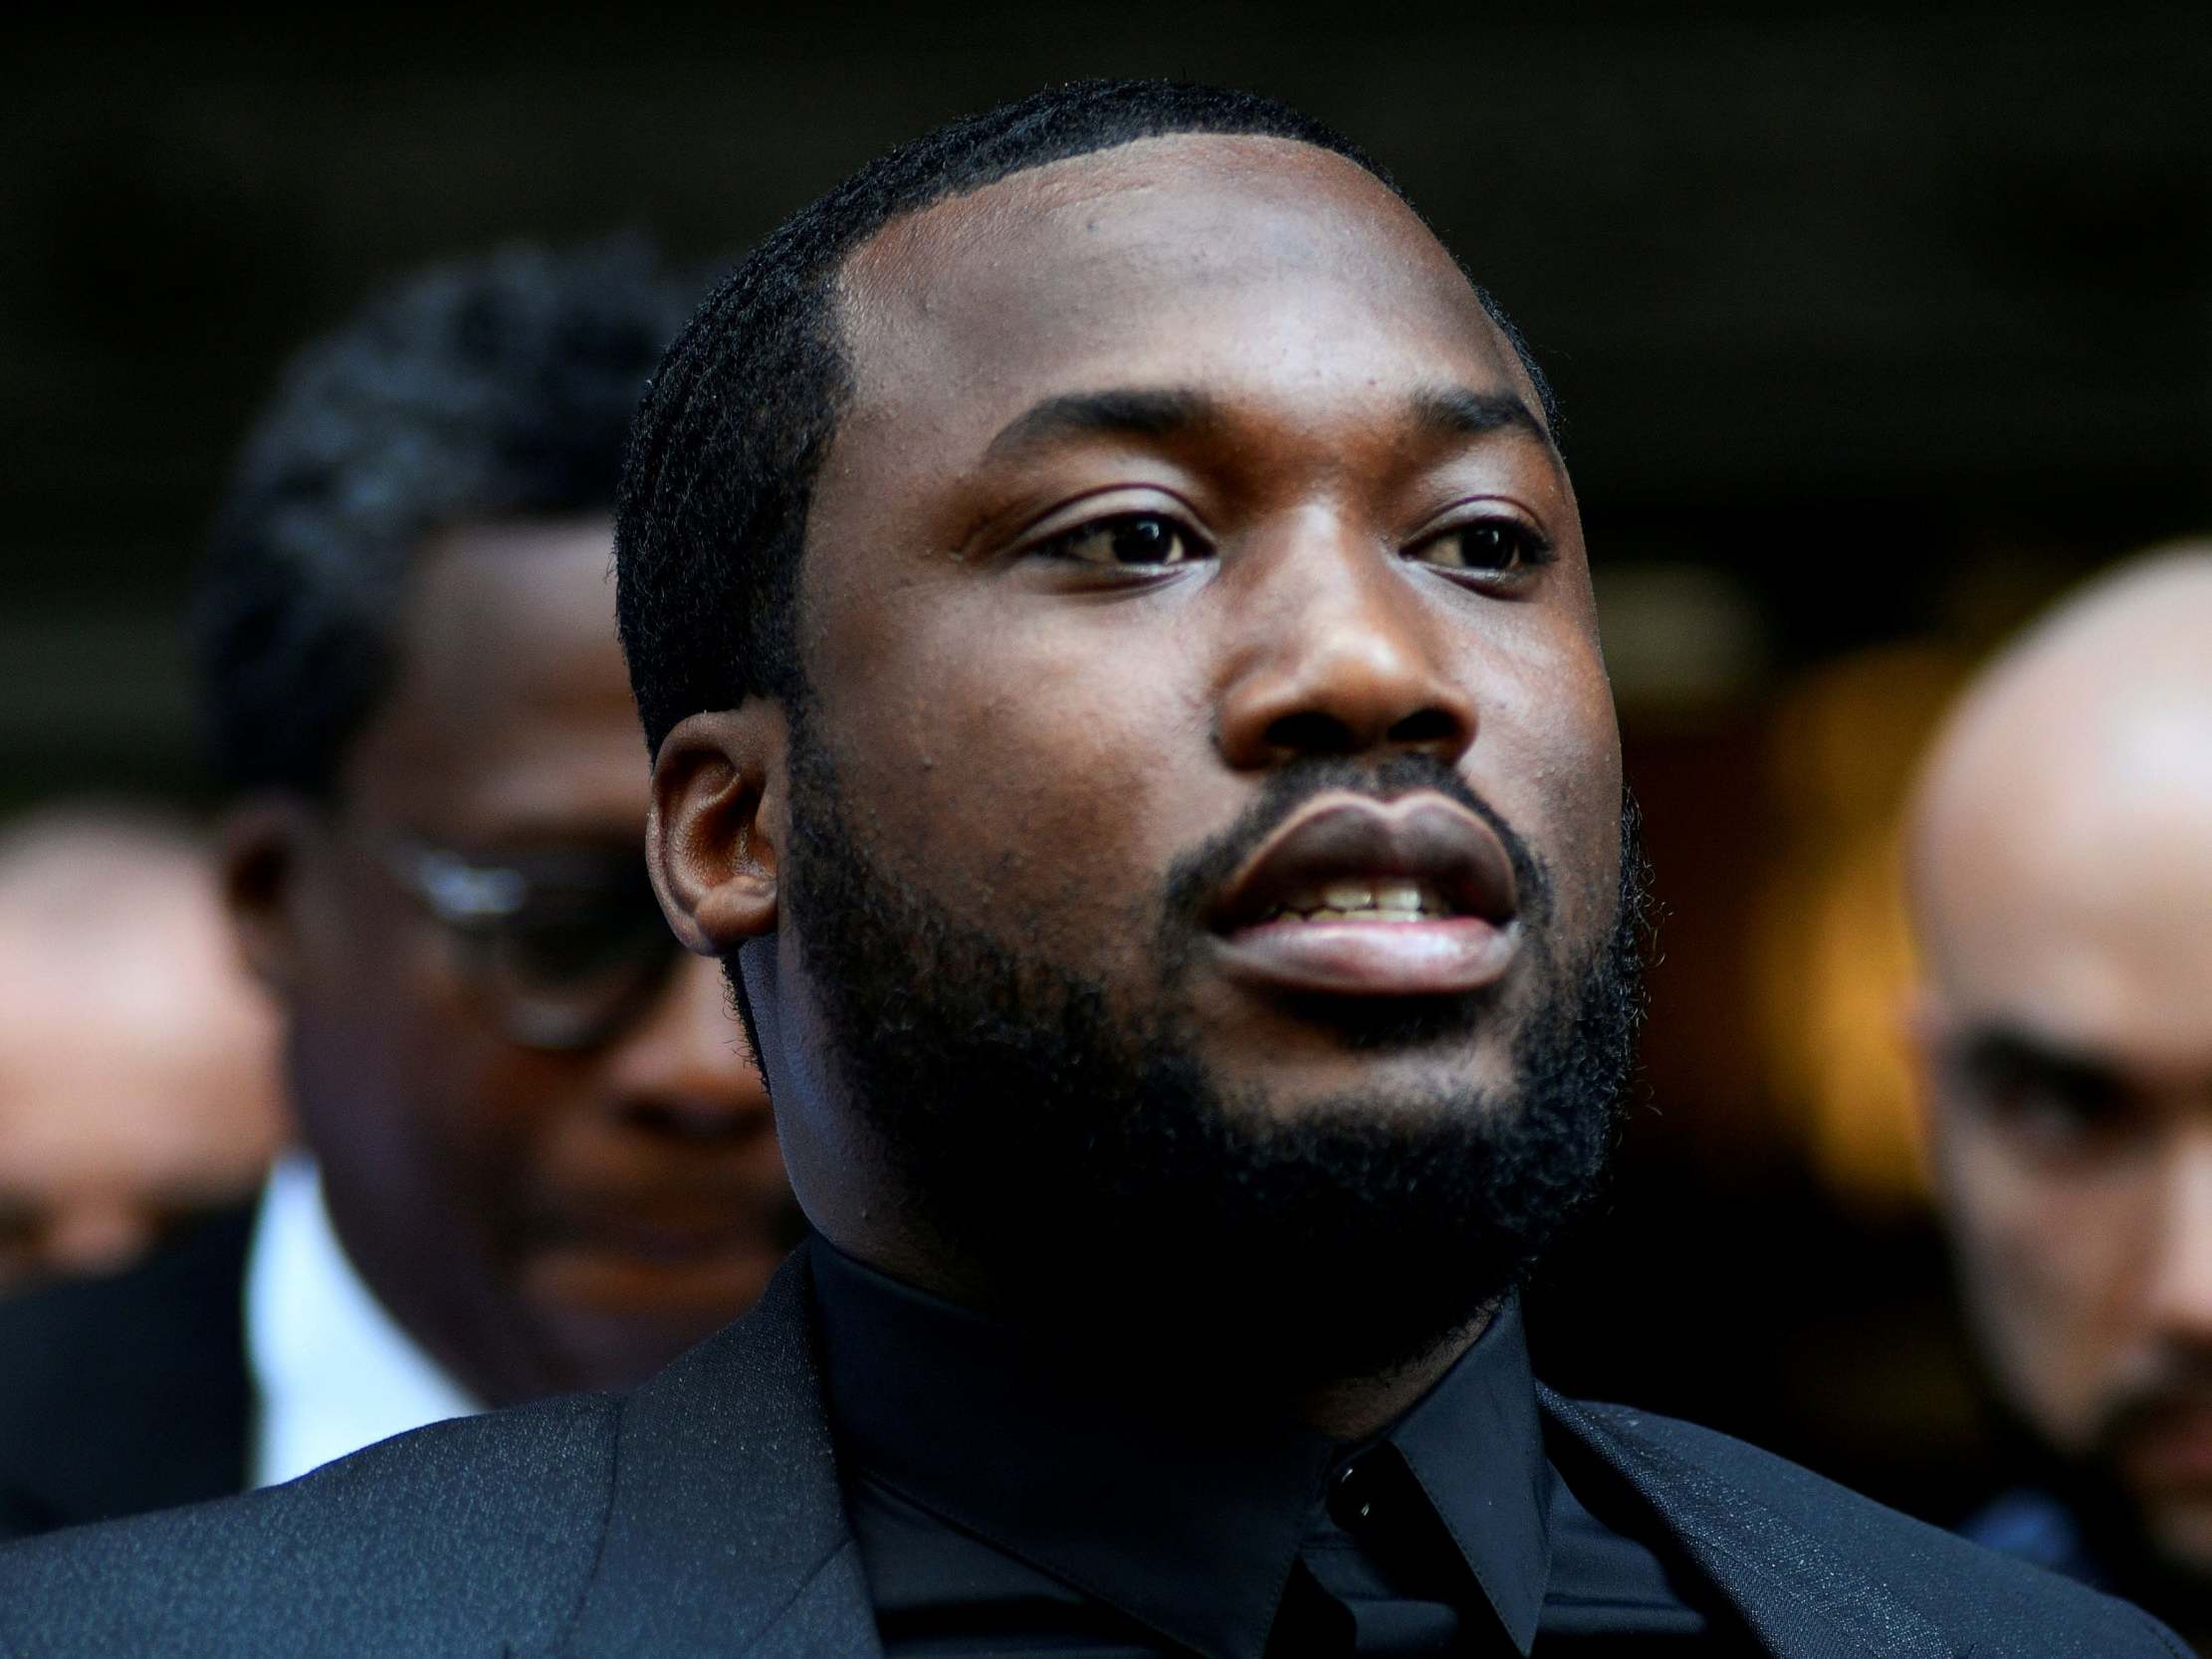 Judges said Meek Mill was likely to be acquitted in a retrial